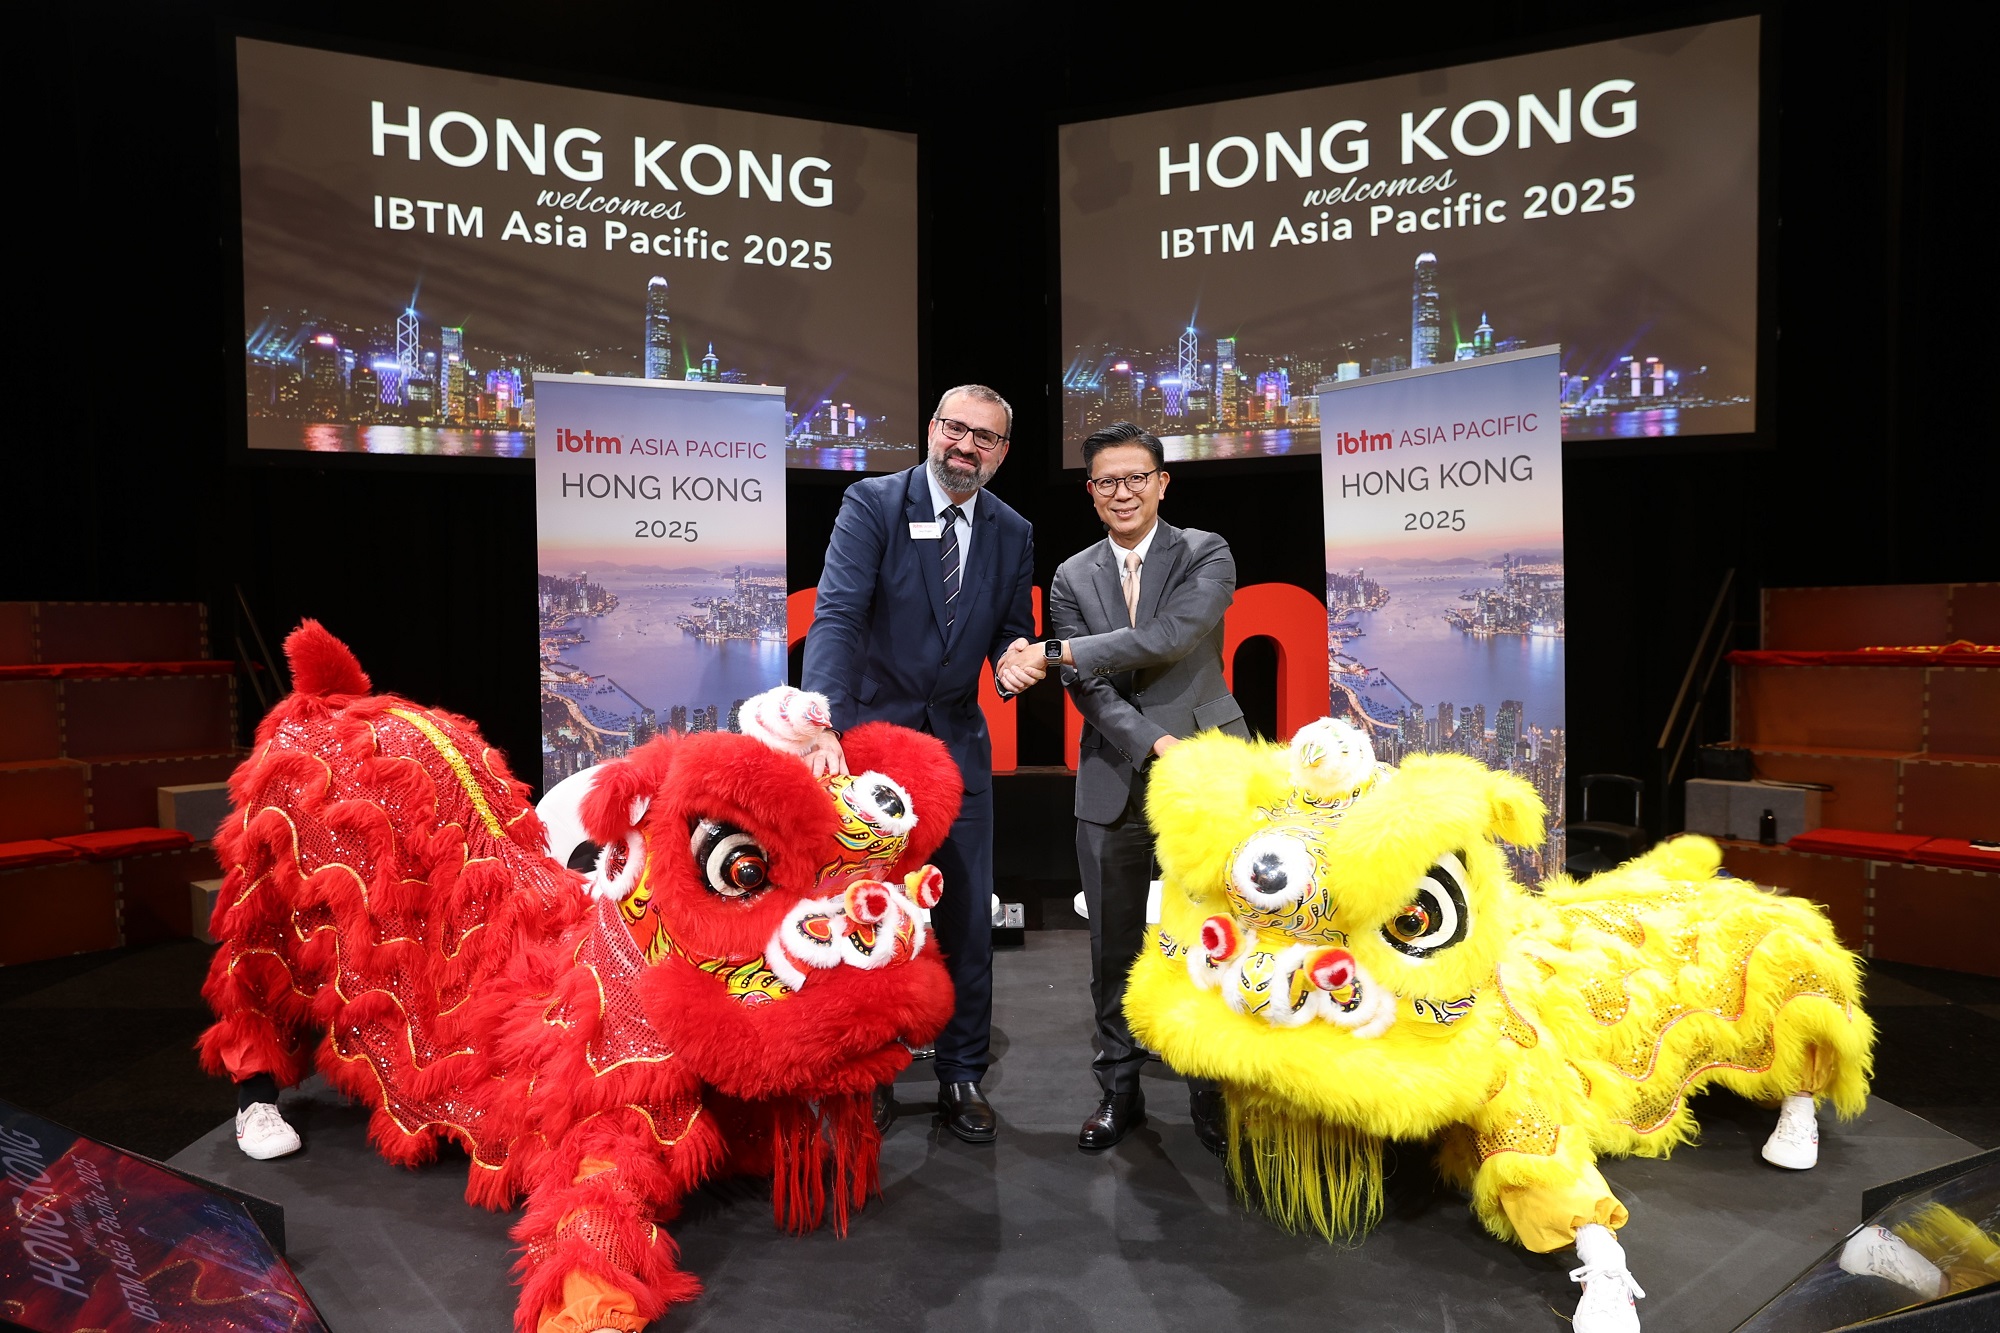 IBTM World 2023, one of the world’s largest and leading MICE trade shows, is held in Barcelona, Spain. General Manager, MICE & Cruise, Regional Director, Europe of Hong Kong Tourism Board, Mr Kenneth Wong (right), and Vasyl Zhygalo, IBTM Portfolio Director (left), announce Hong Kong as the host of IBTM Asia Pacific 2025 at a press conference during the event.